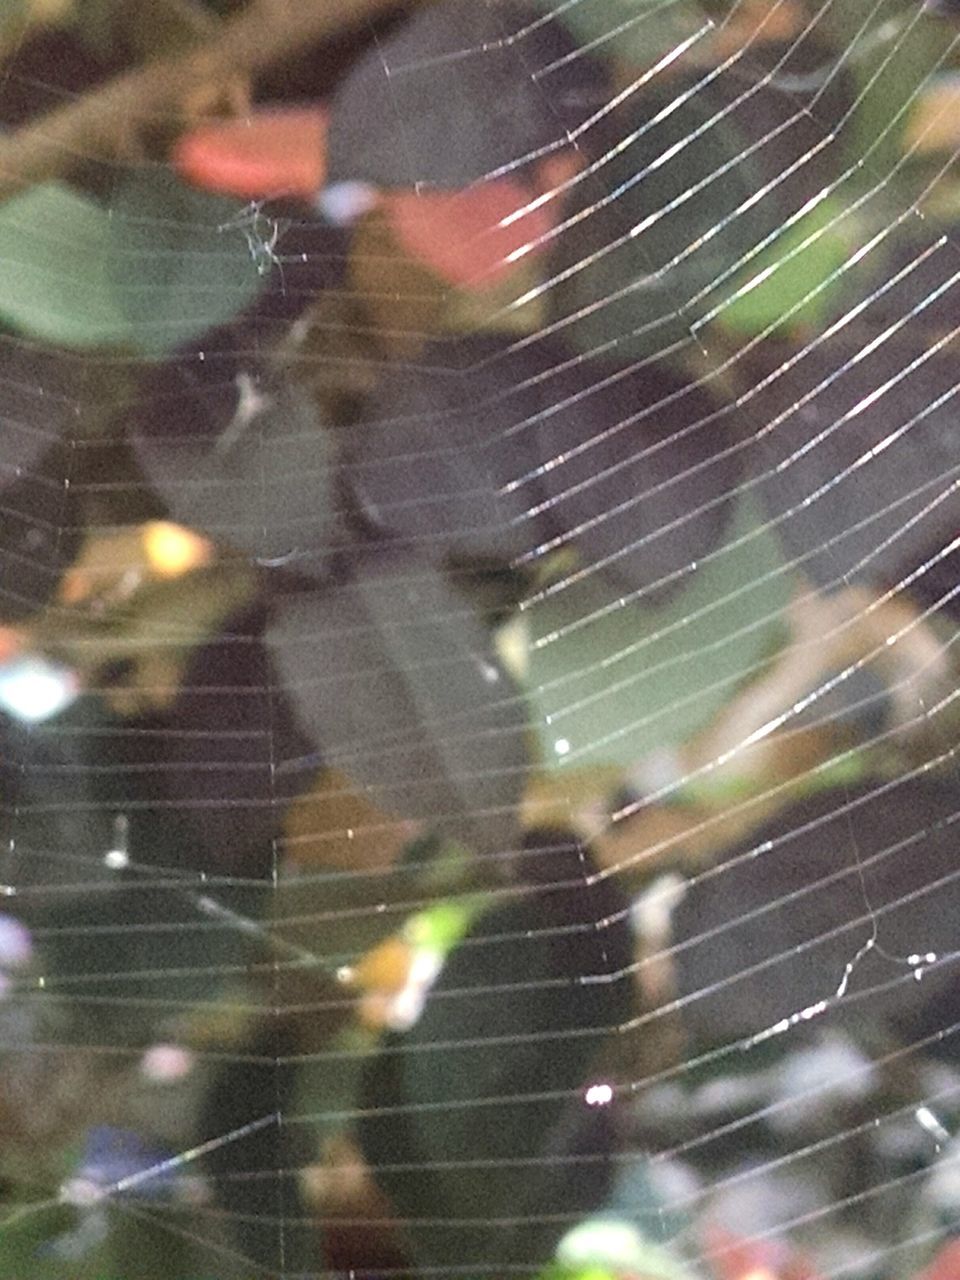 spider web, motion, night, blurred motion, wet, illuminated, drop, long exposure, water, pattern, spider, rain, close-up, backgrounds, no people, indoors, full frame, focus on foreground, speed, fragility